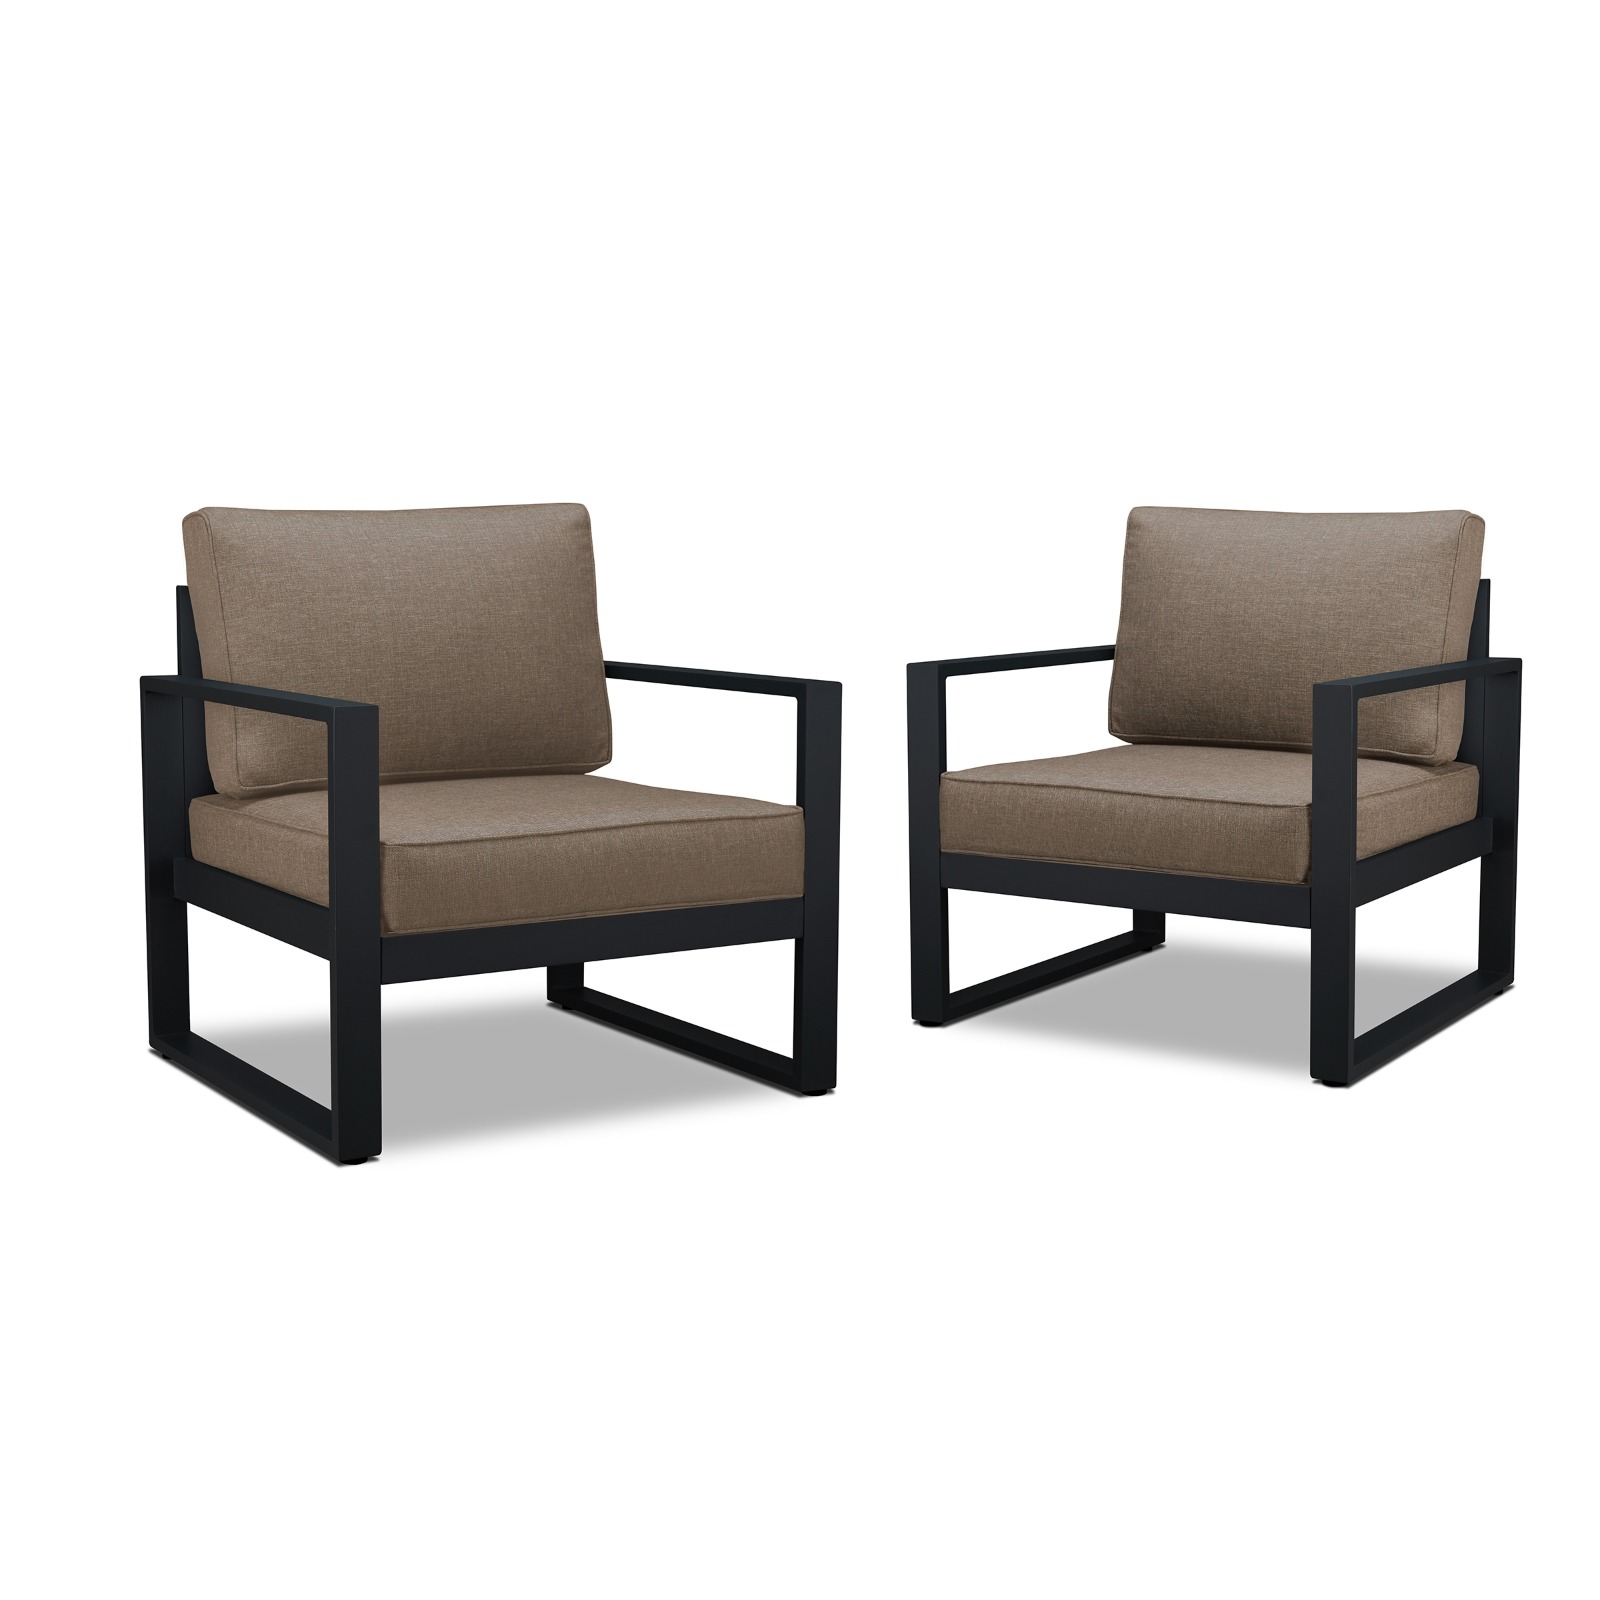 Baltic Outdoor Chair Set Patio Chair Set Patio Furniture